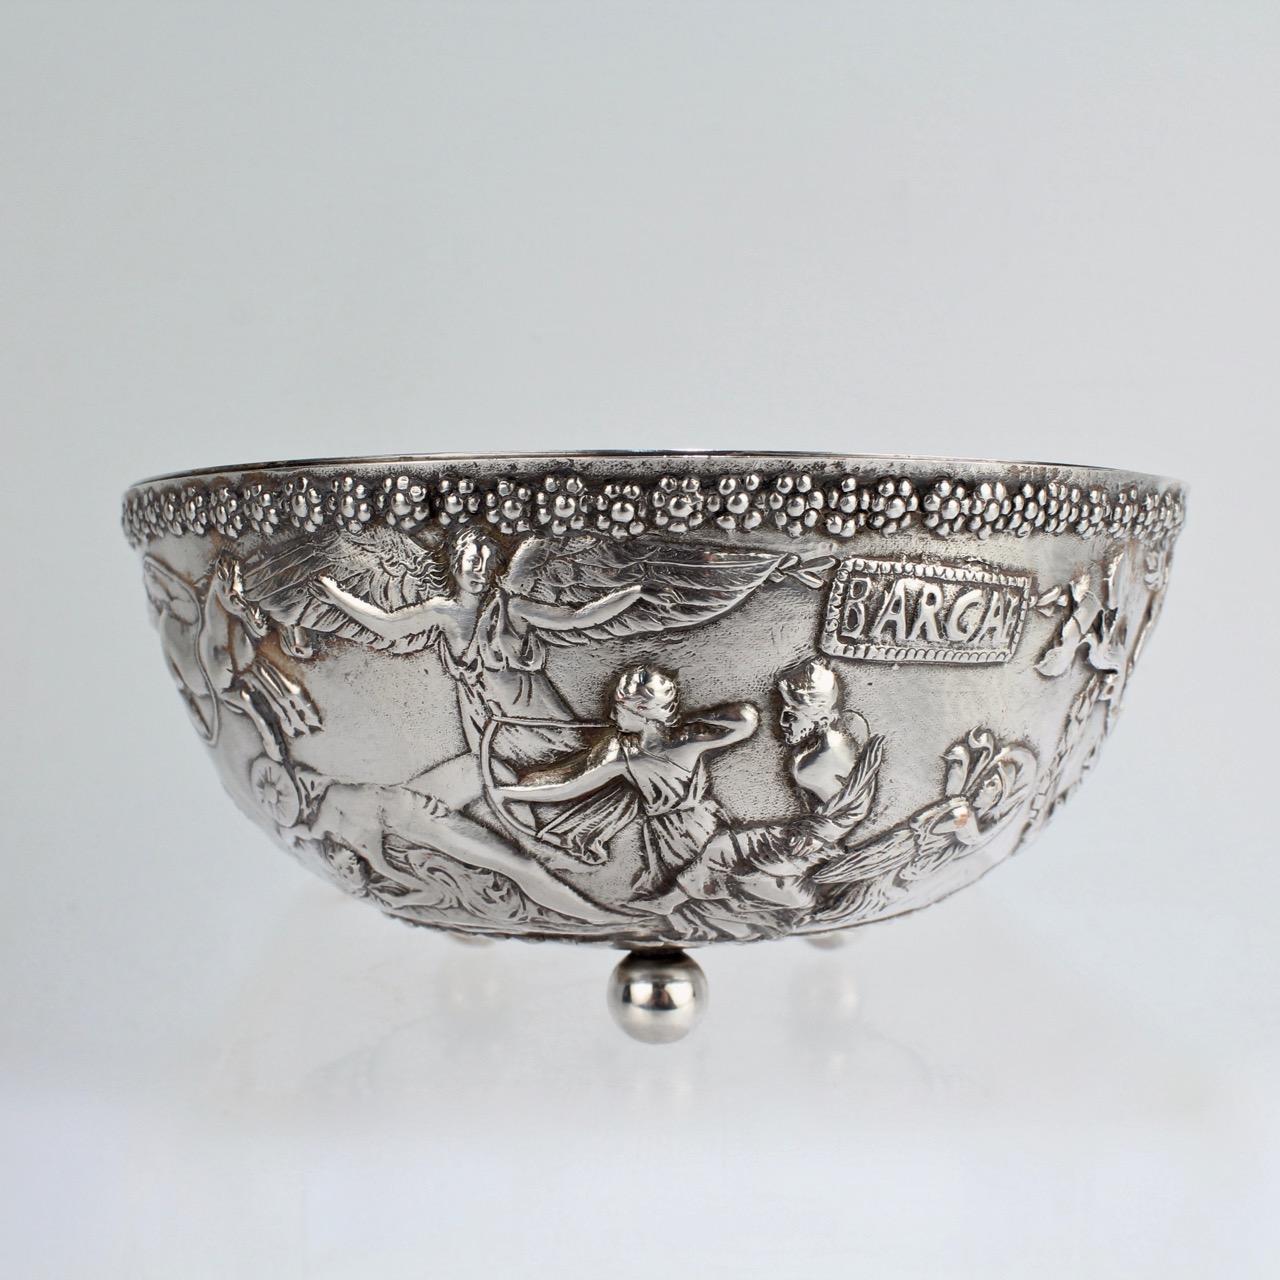 Etruscan Revival Antique Silvered Bronze Roman or Archaeological Revival Bowl by E F Caldwell For Sale